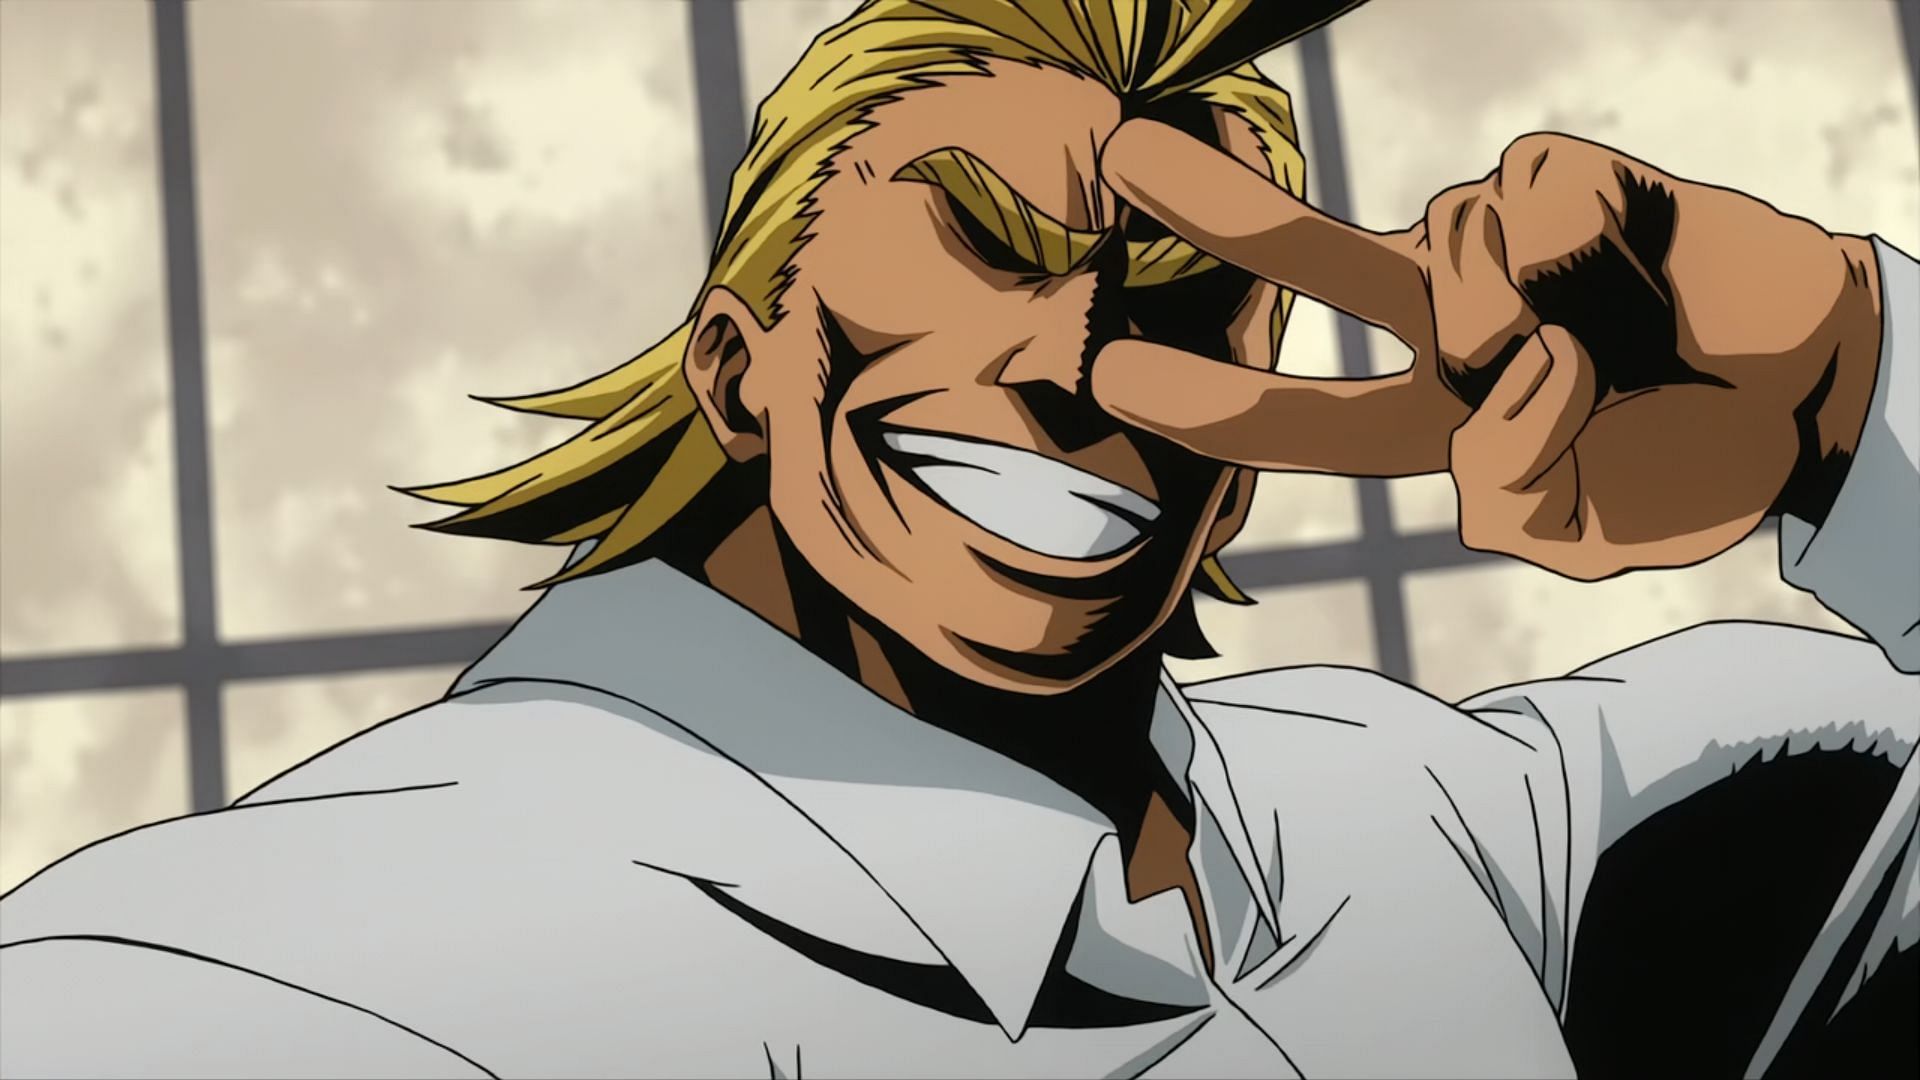 All Might as seen in the series